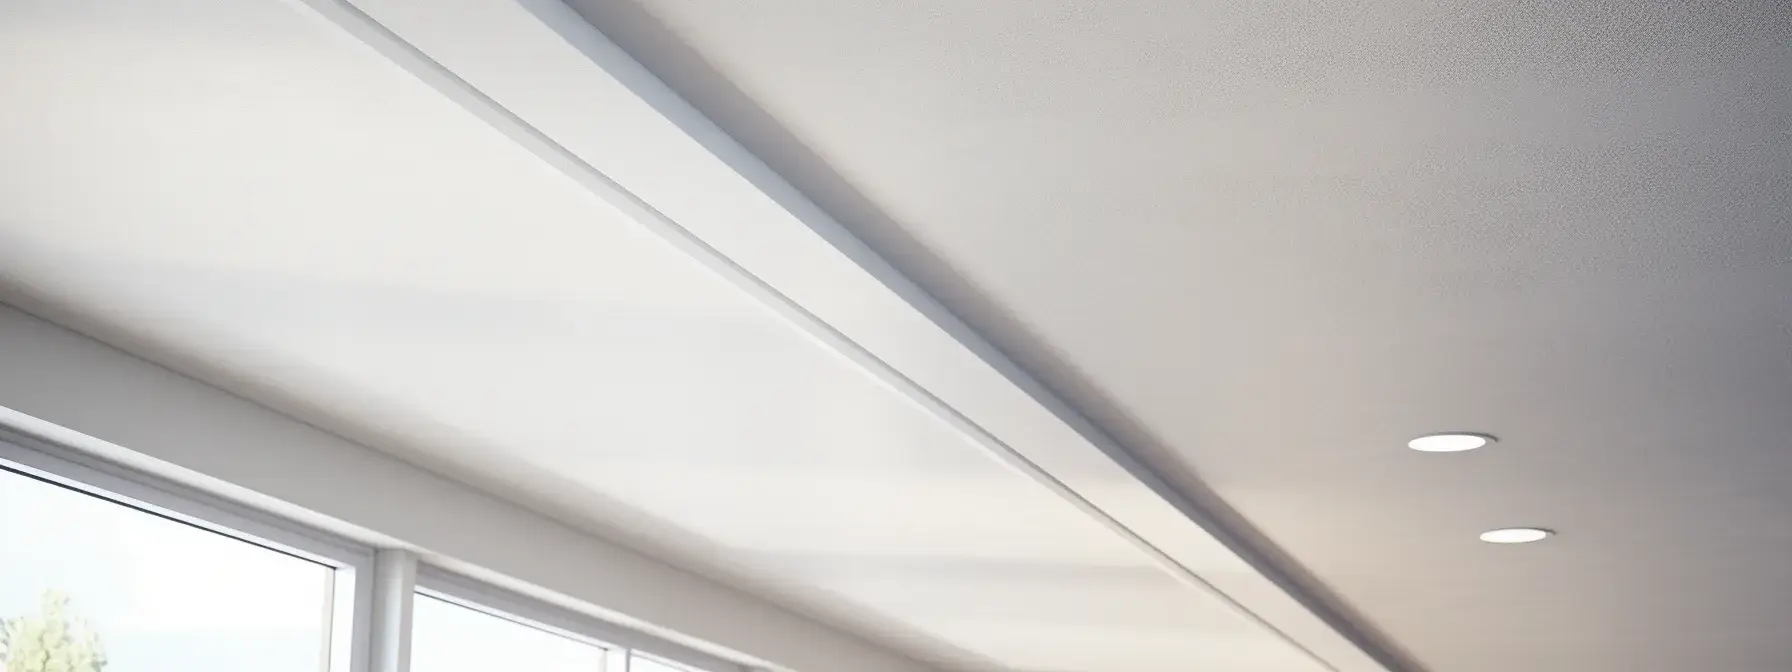 a close-up view of a drywall installation showcasing a smooth, flawless finish.